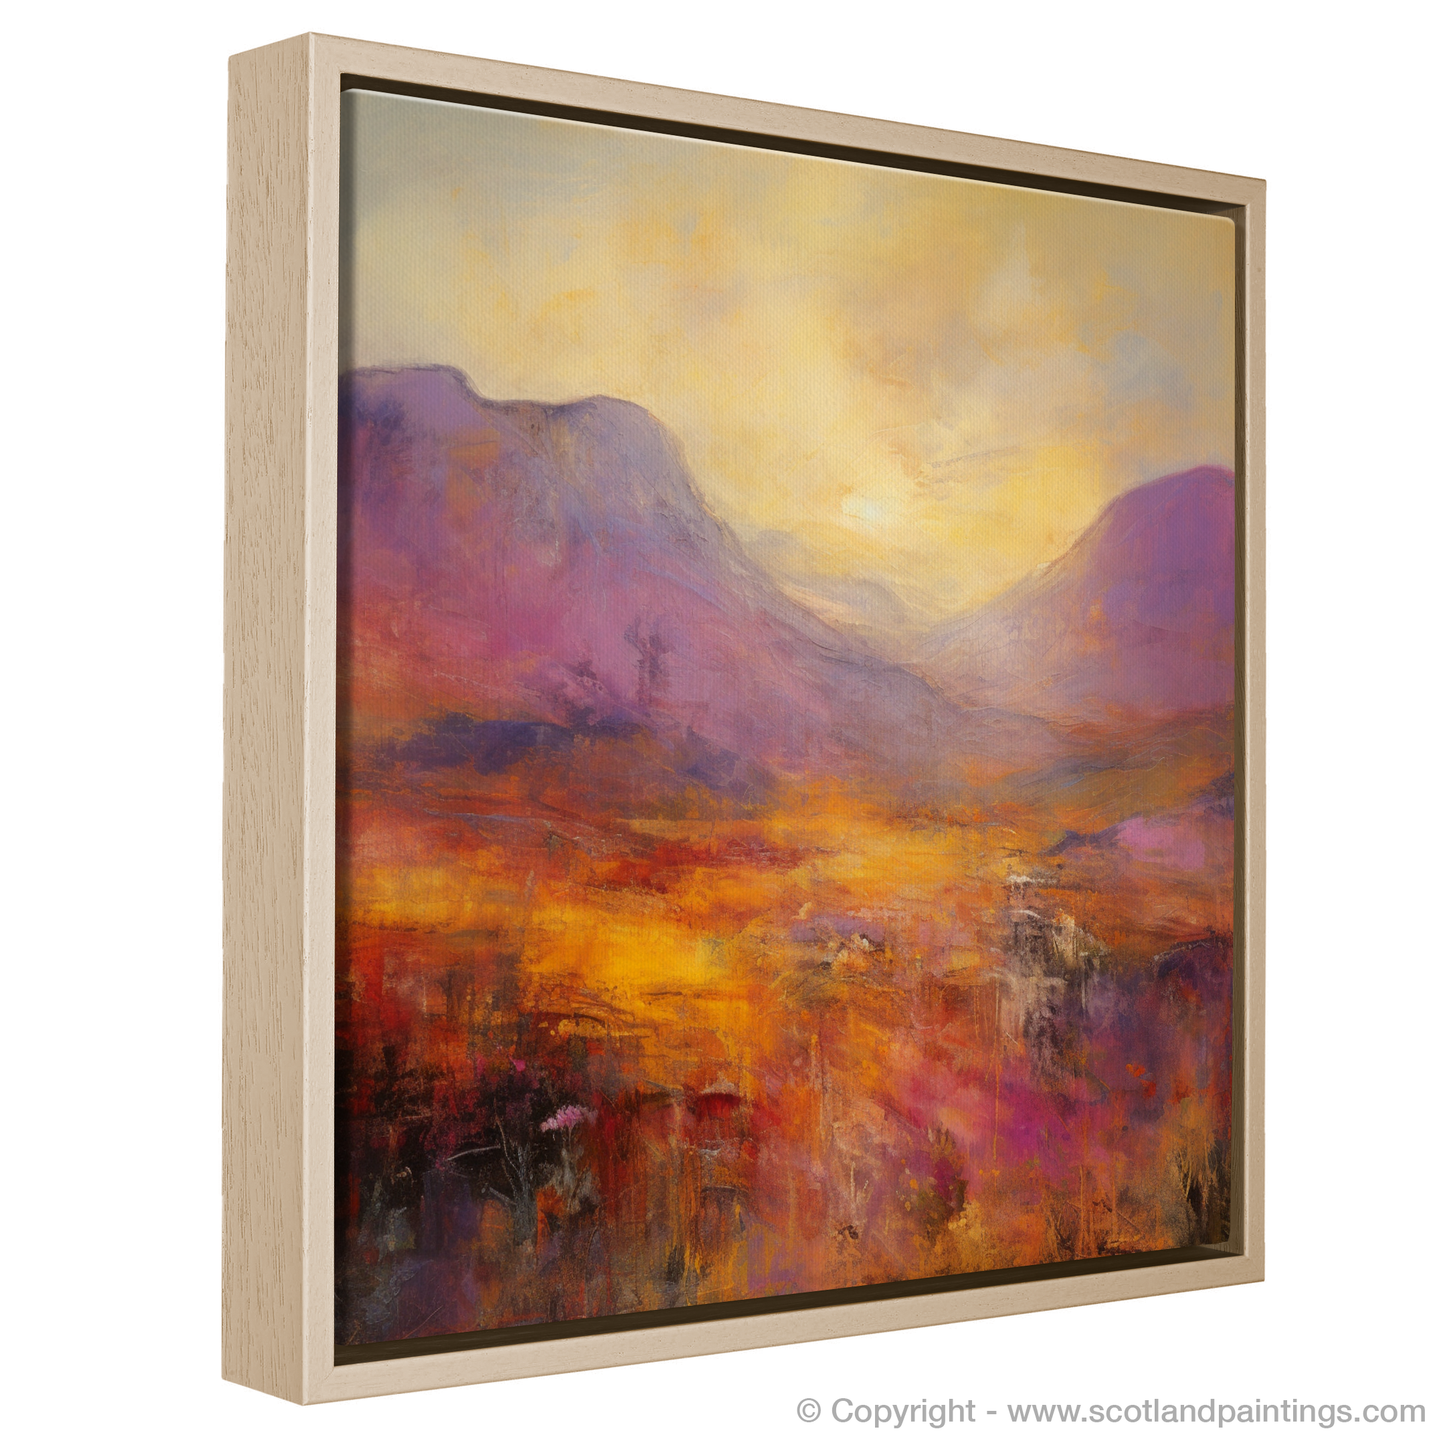 Painting and Art Print of Golden light on heather in Glencoe entitled "Golden Heather Glow: An Abstract Ode to Glencoe's Majesty".